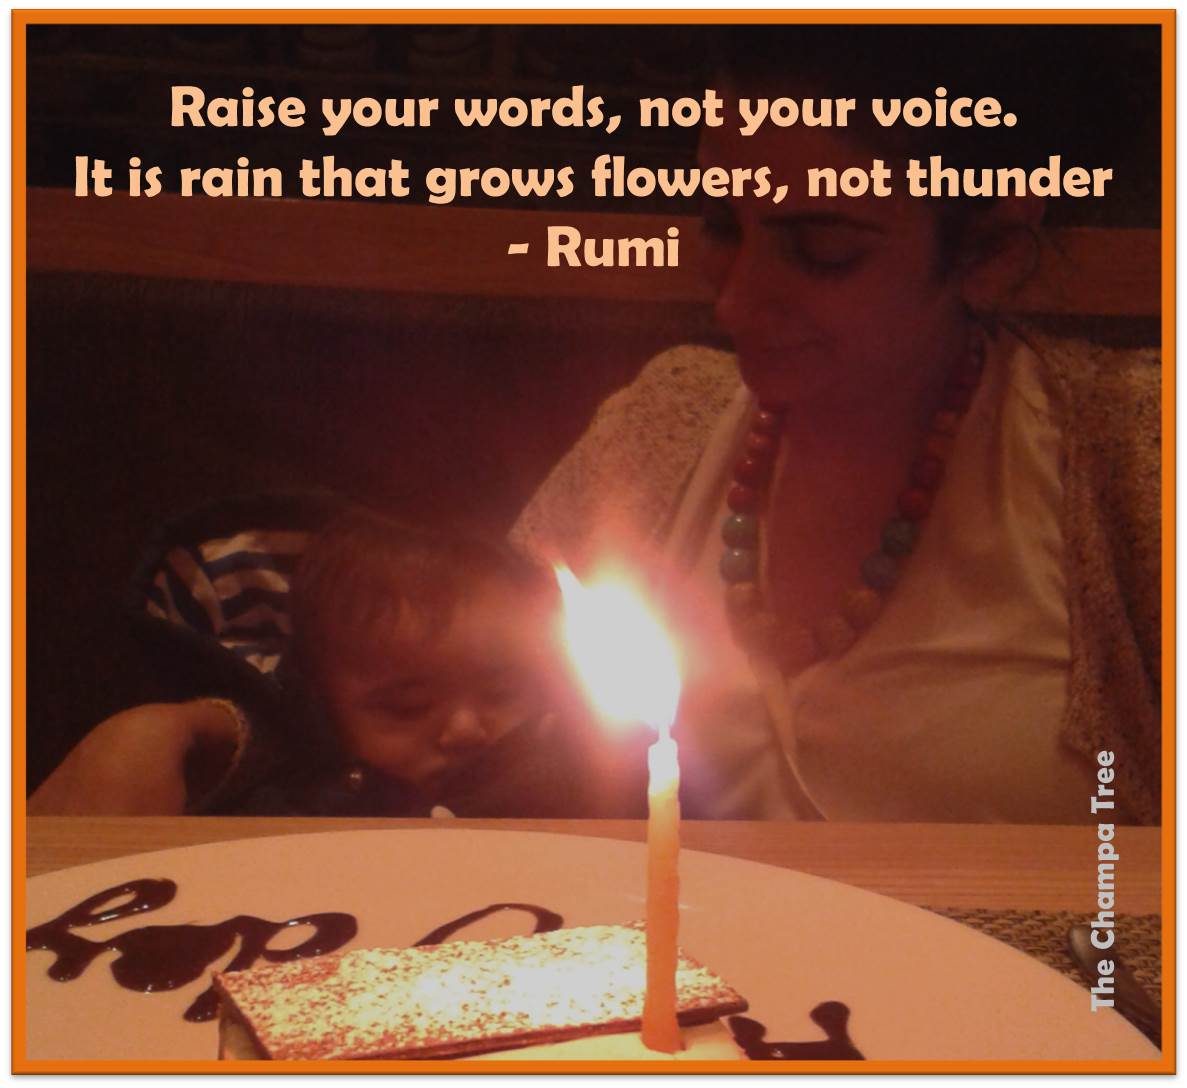 Thought for the day - Raise your words